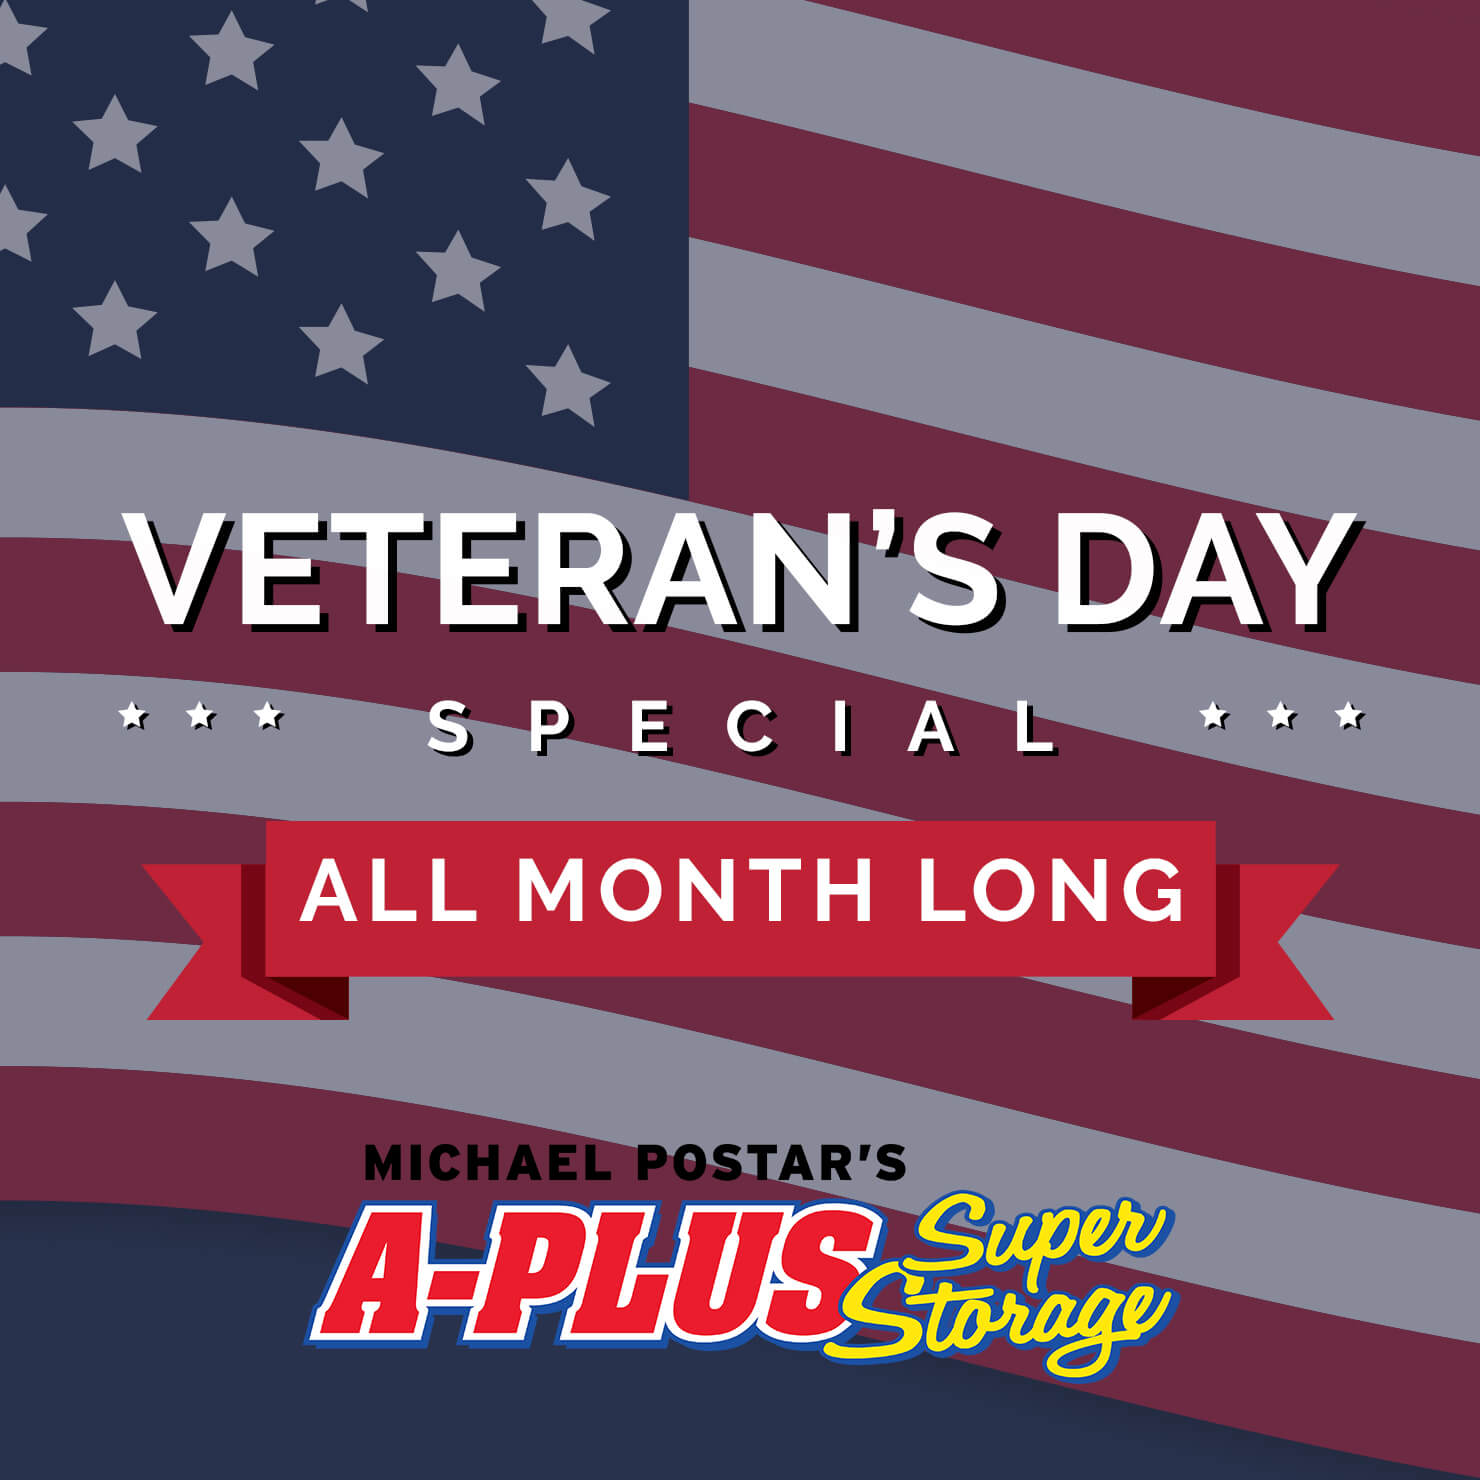 A-Plus Super Storage Offers Veterans Day Discount